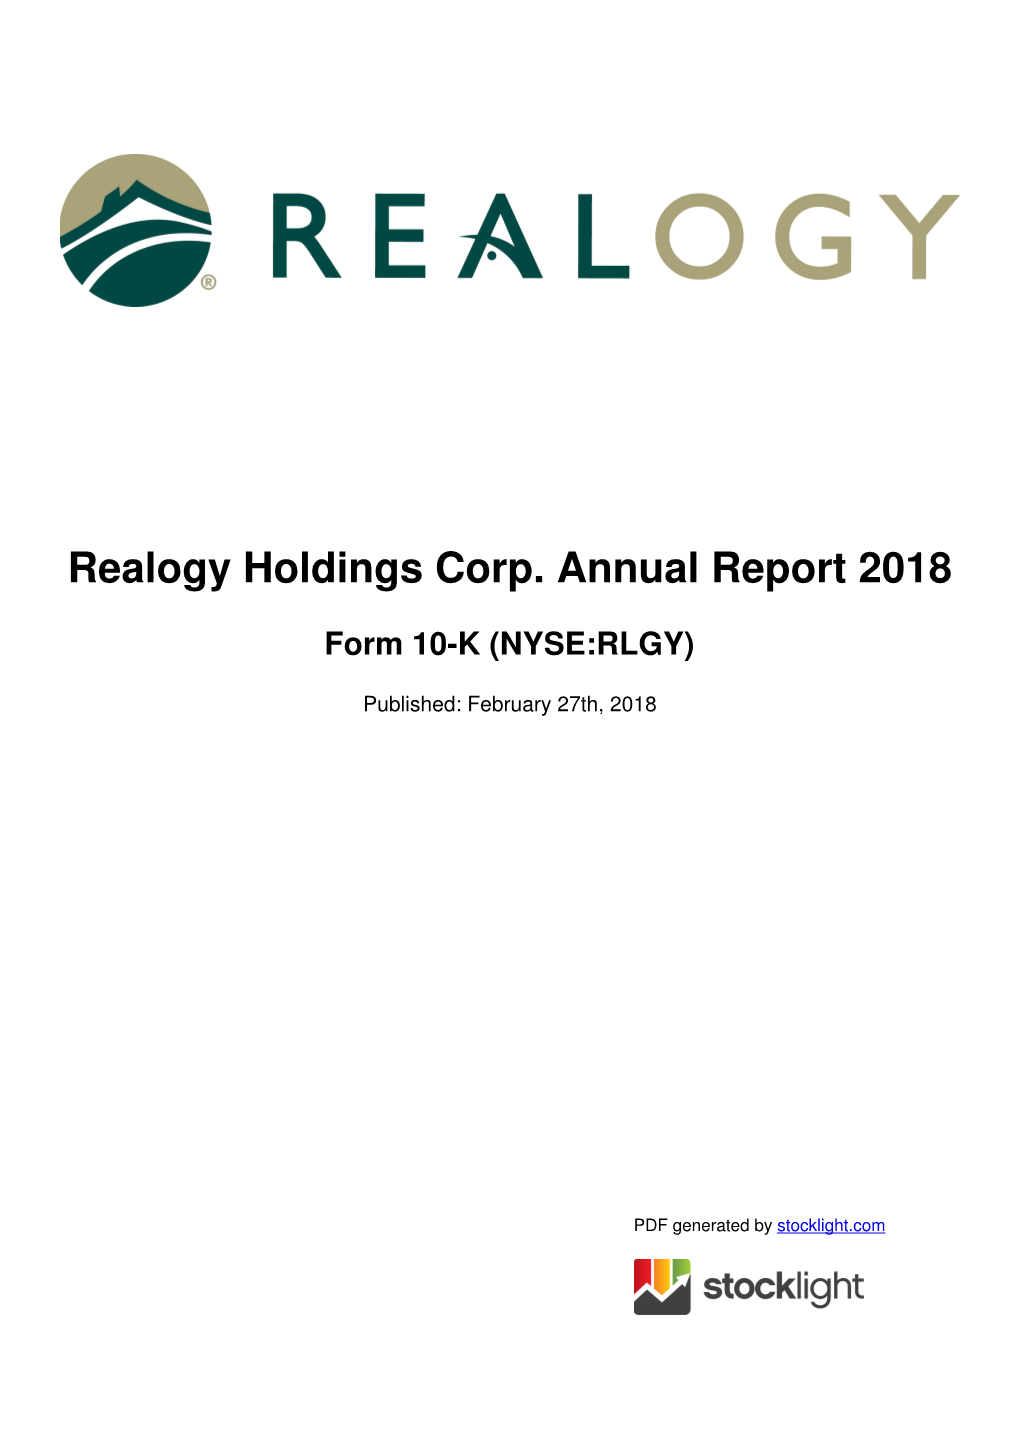 Realogy Holdings Corp. Annual Report 2018